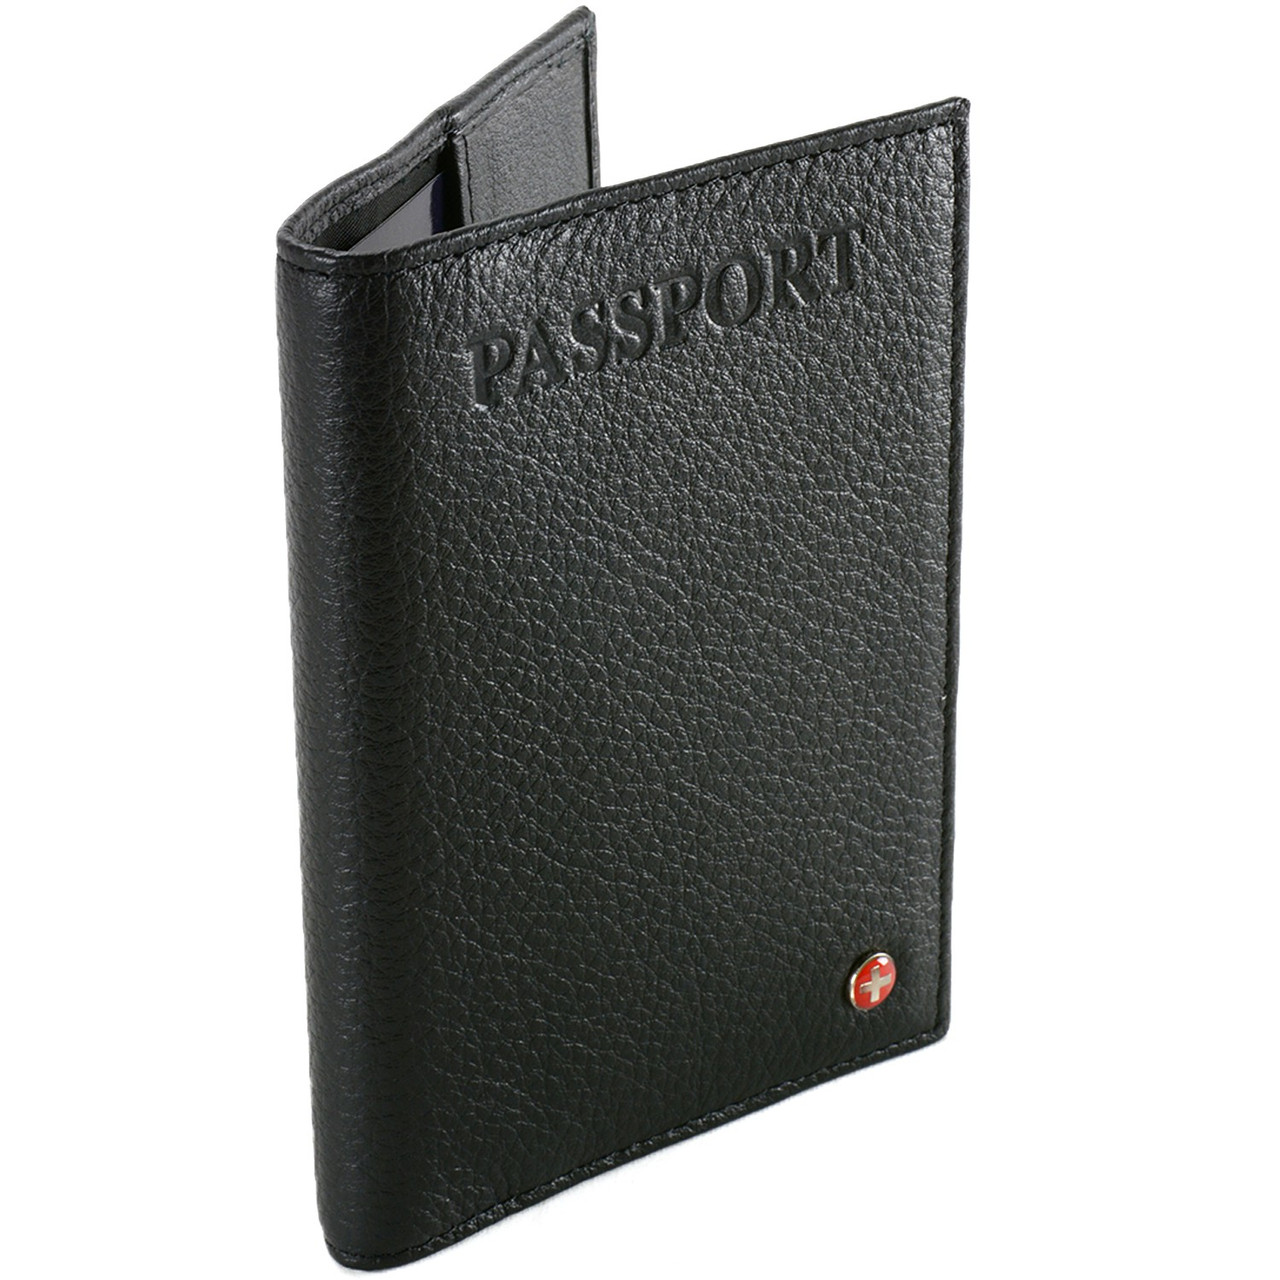 Wholesale Genuine Leather Passport Cover Wallet